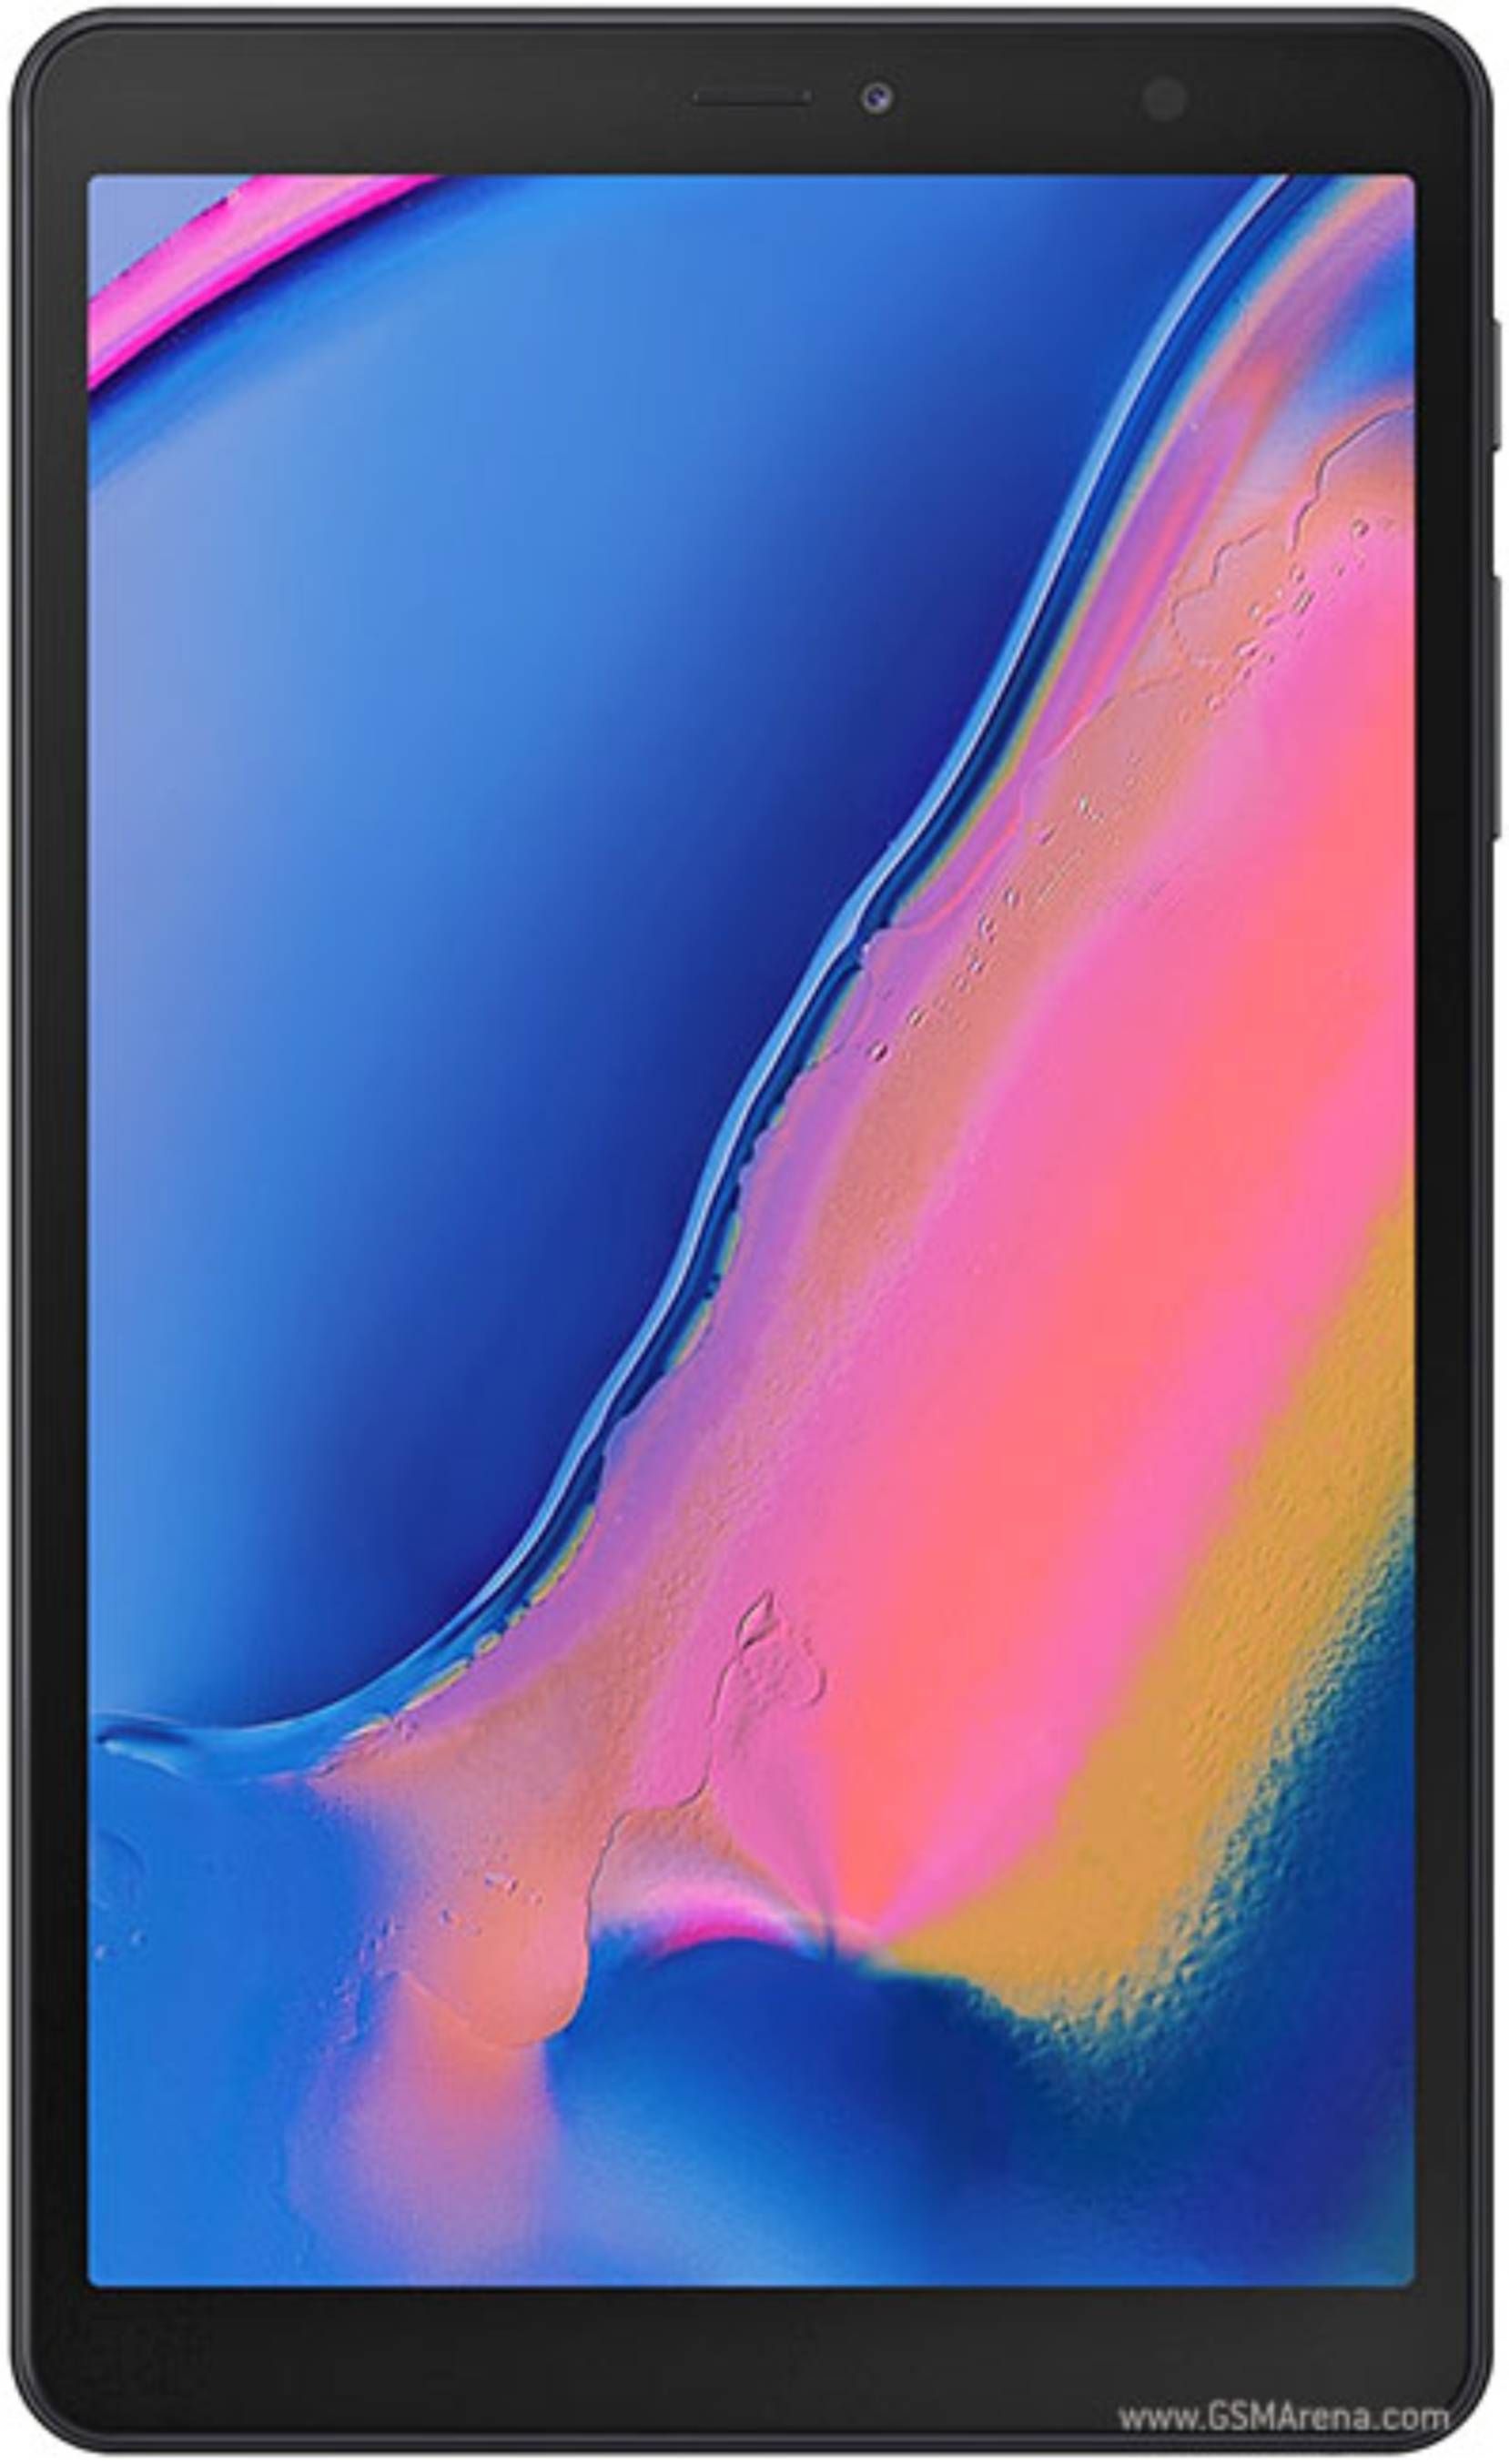 Samsung Galaxy Tab A 8.0 & S Pen (2019) Specifications and Price in Kenya